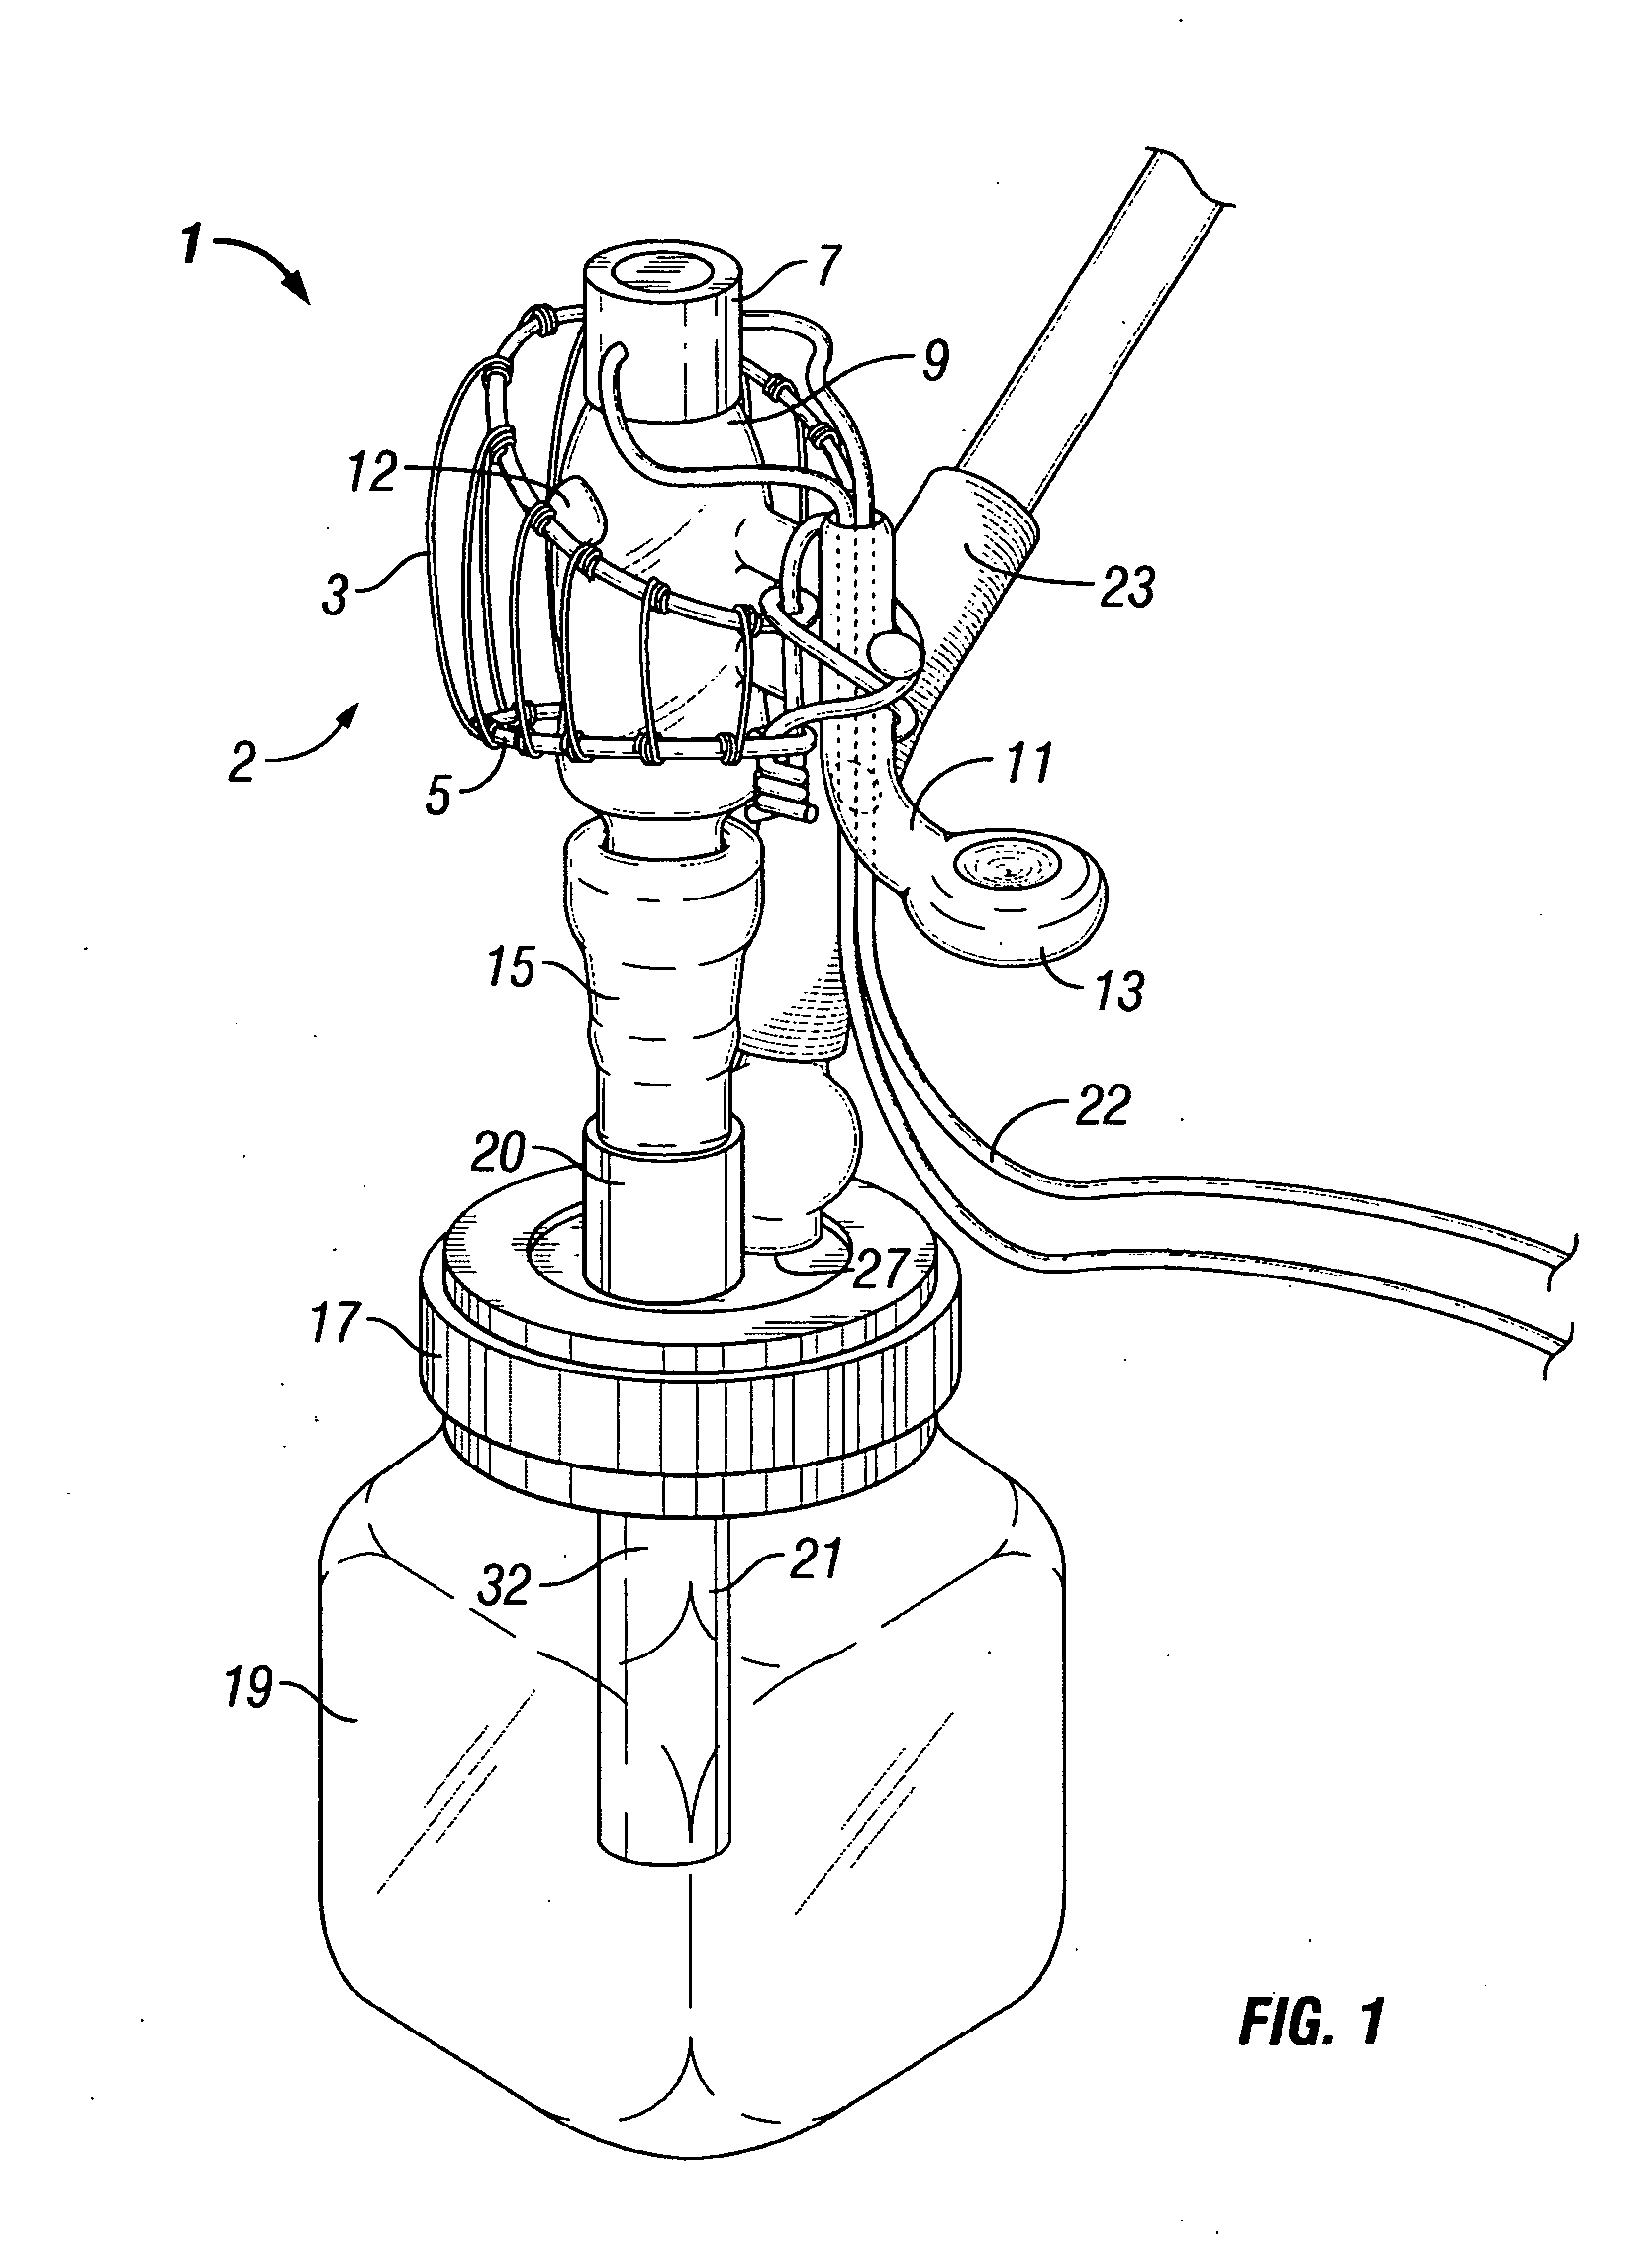 Tobacco vaporizer and related water pipe system